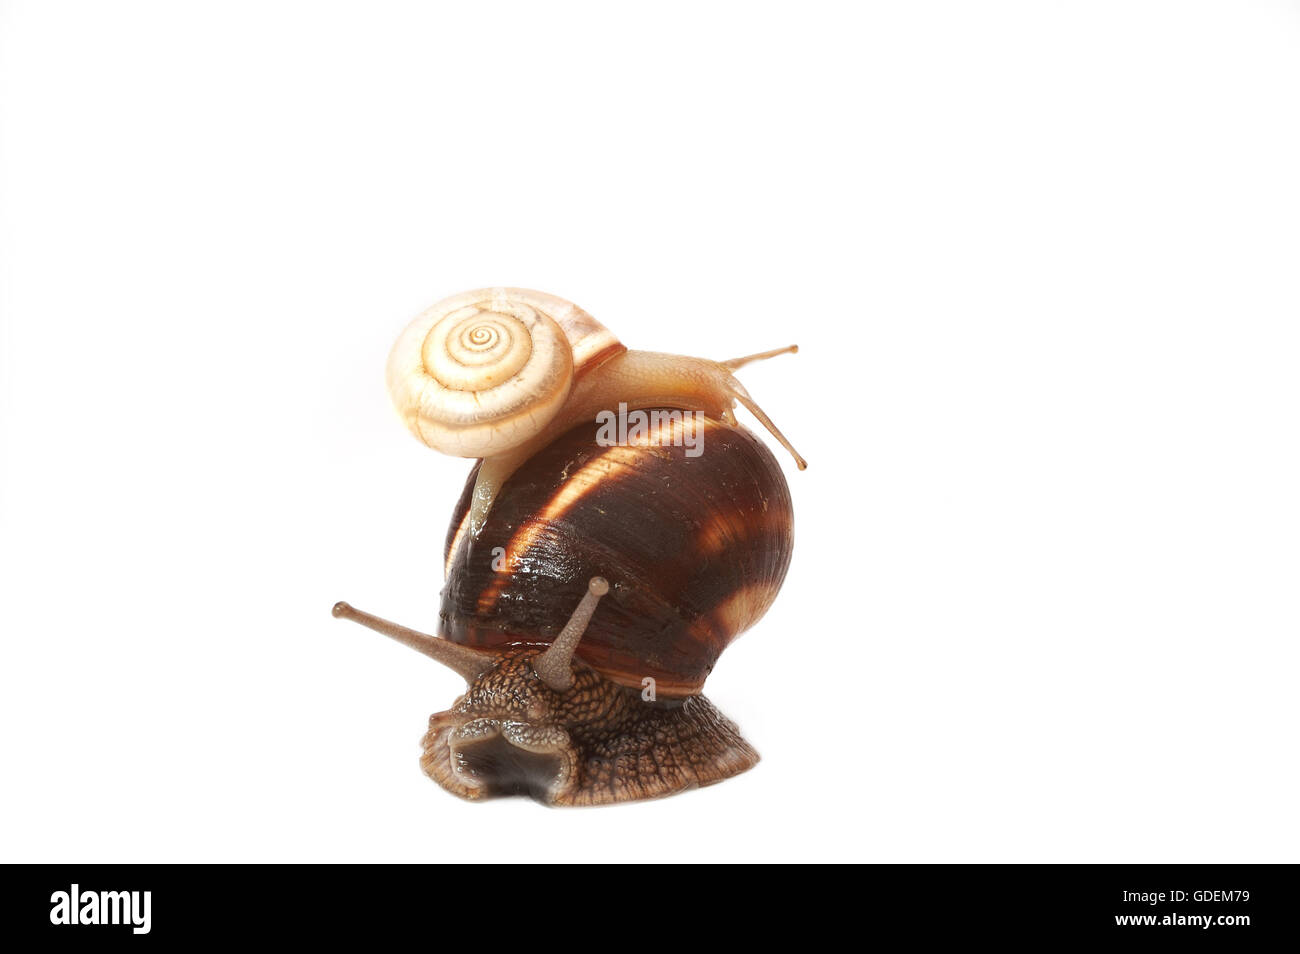 two garden snails and a small snail,representing a family Stock Photo